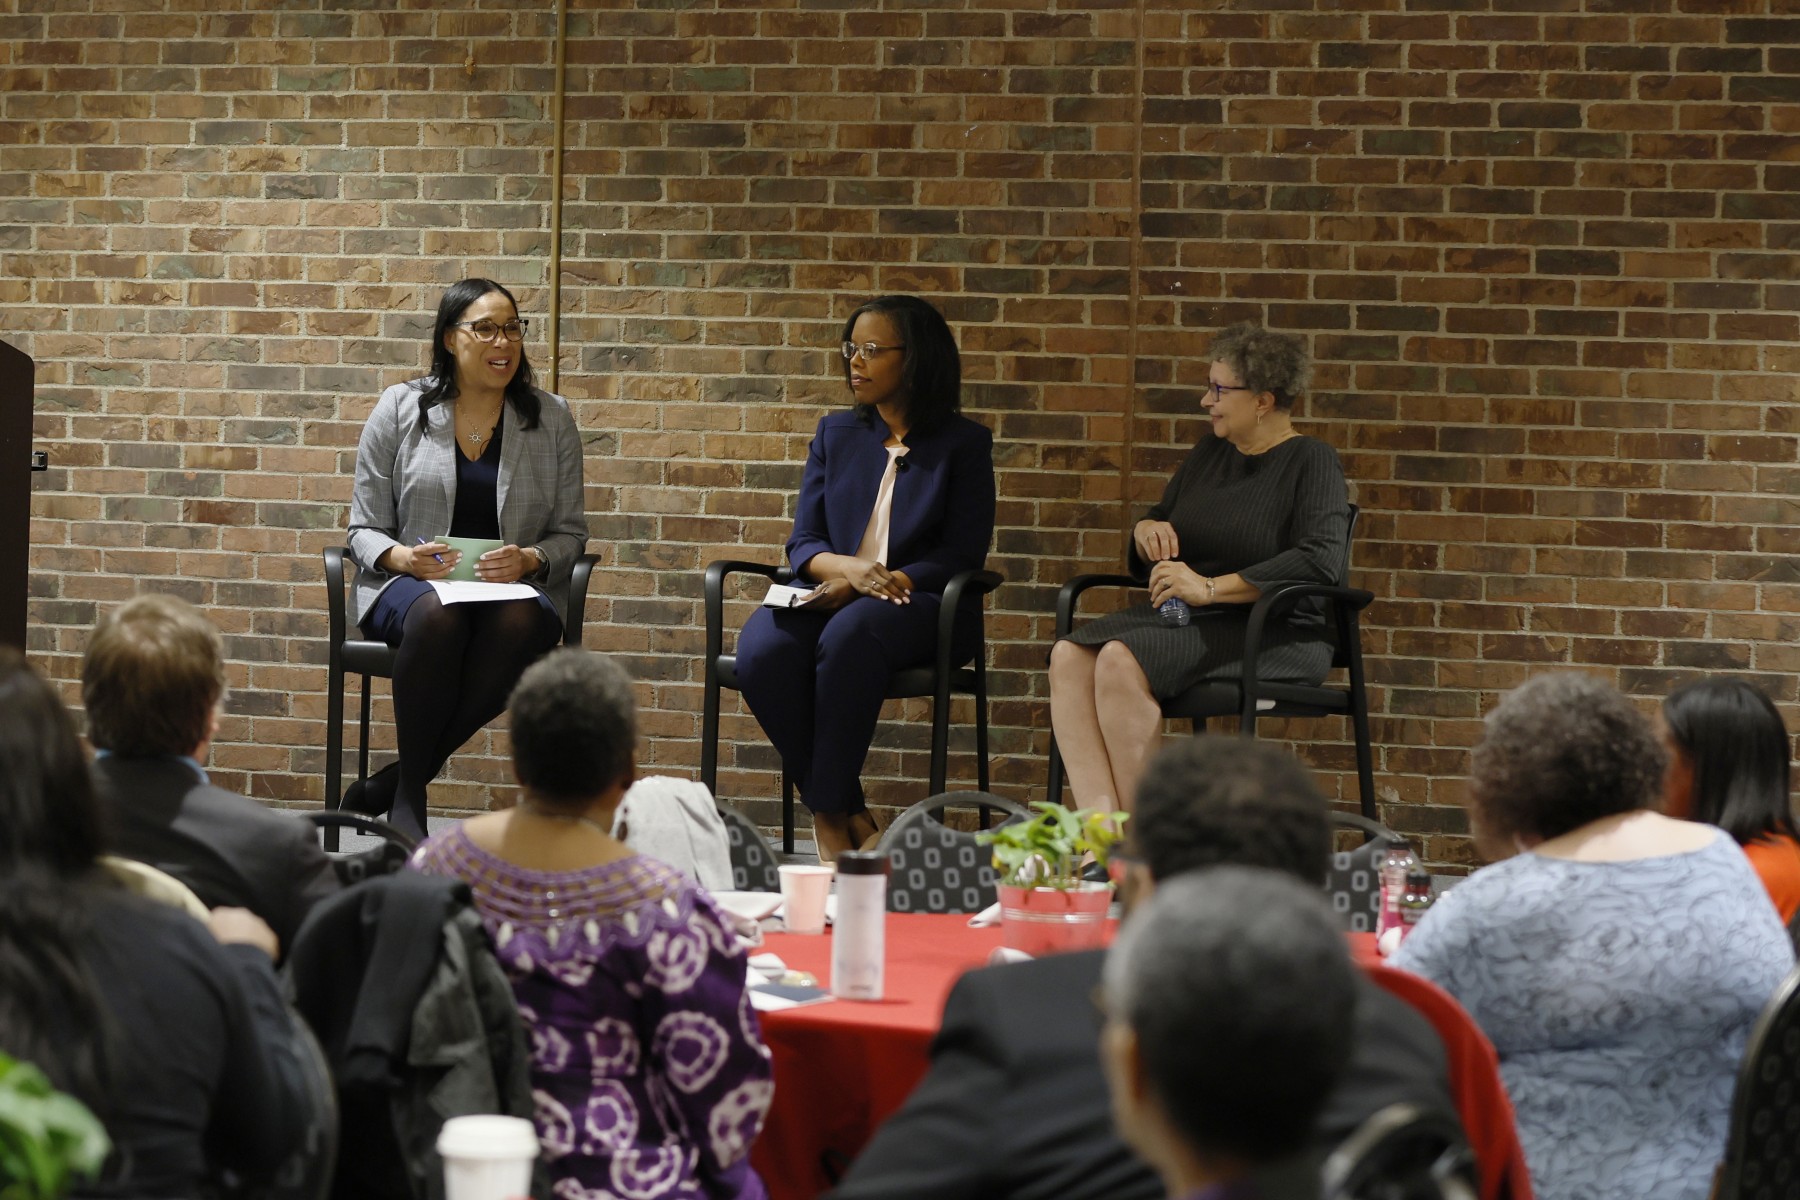 Kirwan Institute Executive Director Ange-Marie Hancock (left) led a panel discussion on youth suicide prevention with Morehouse College of Medicine professor Nicole King Cotton and Ohio State's Beverly Vandiver.